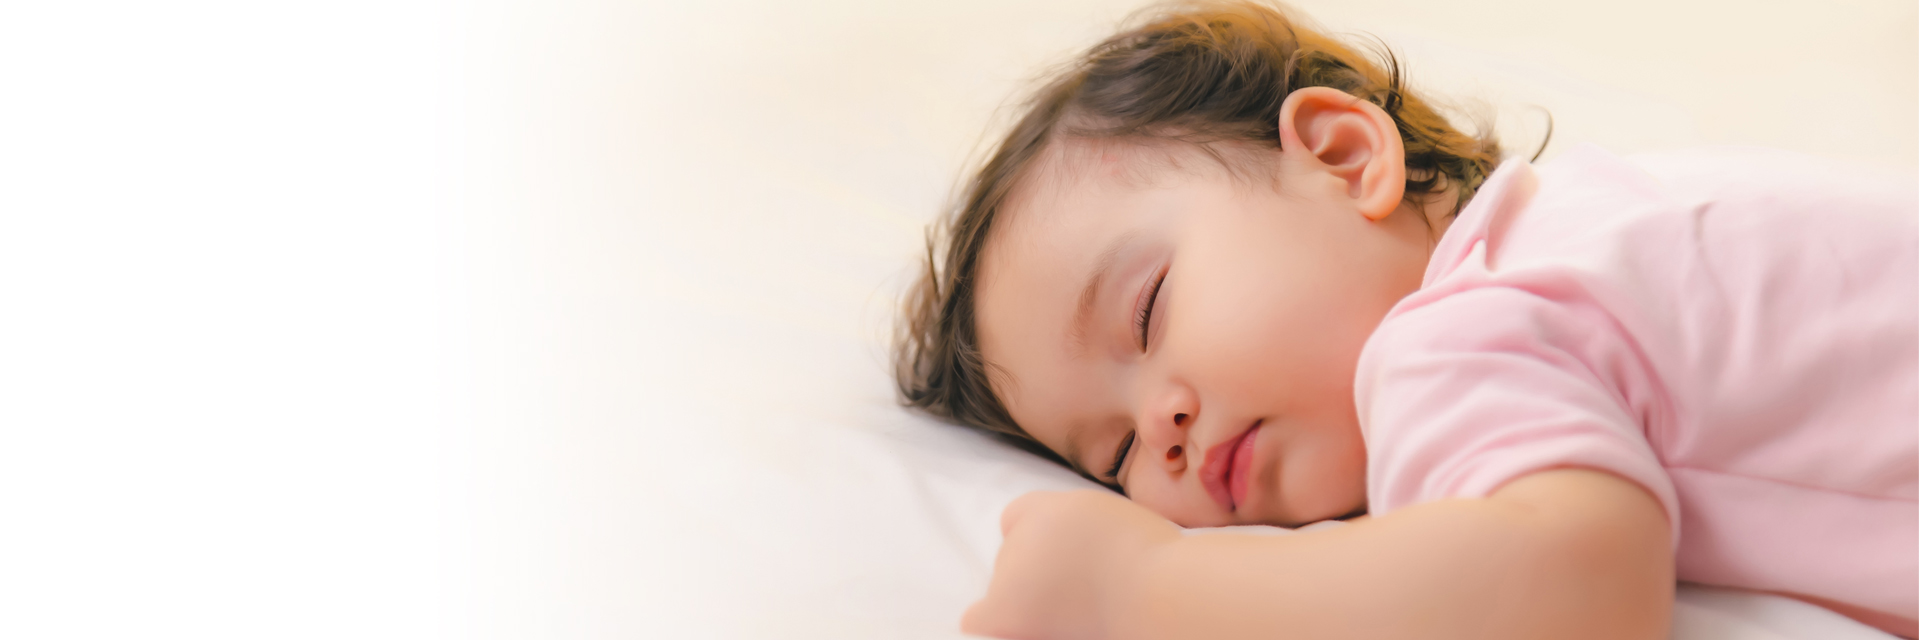 Infant baby sleeping on bed